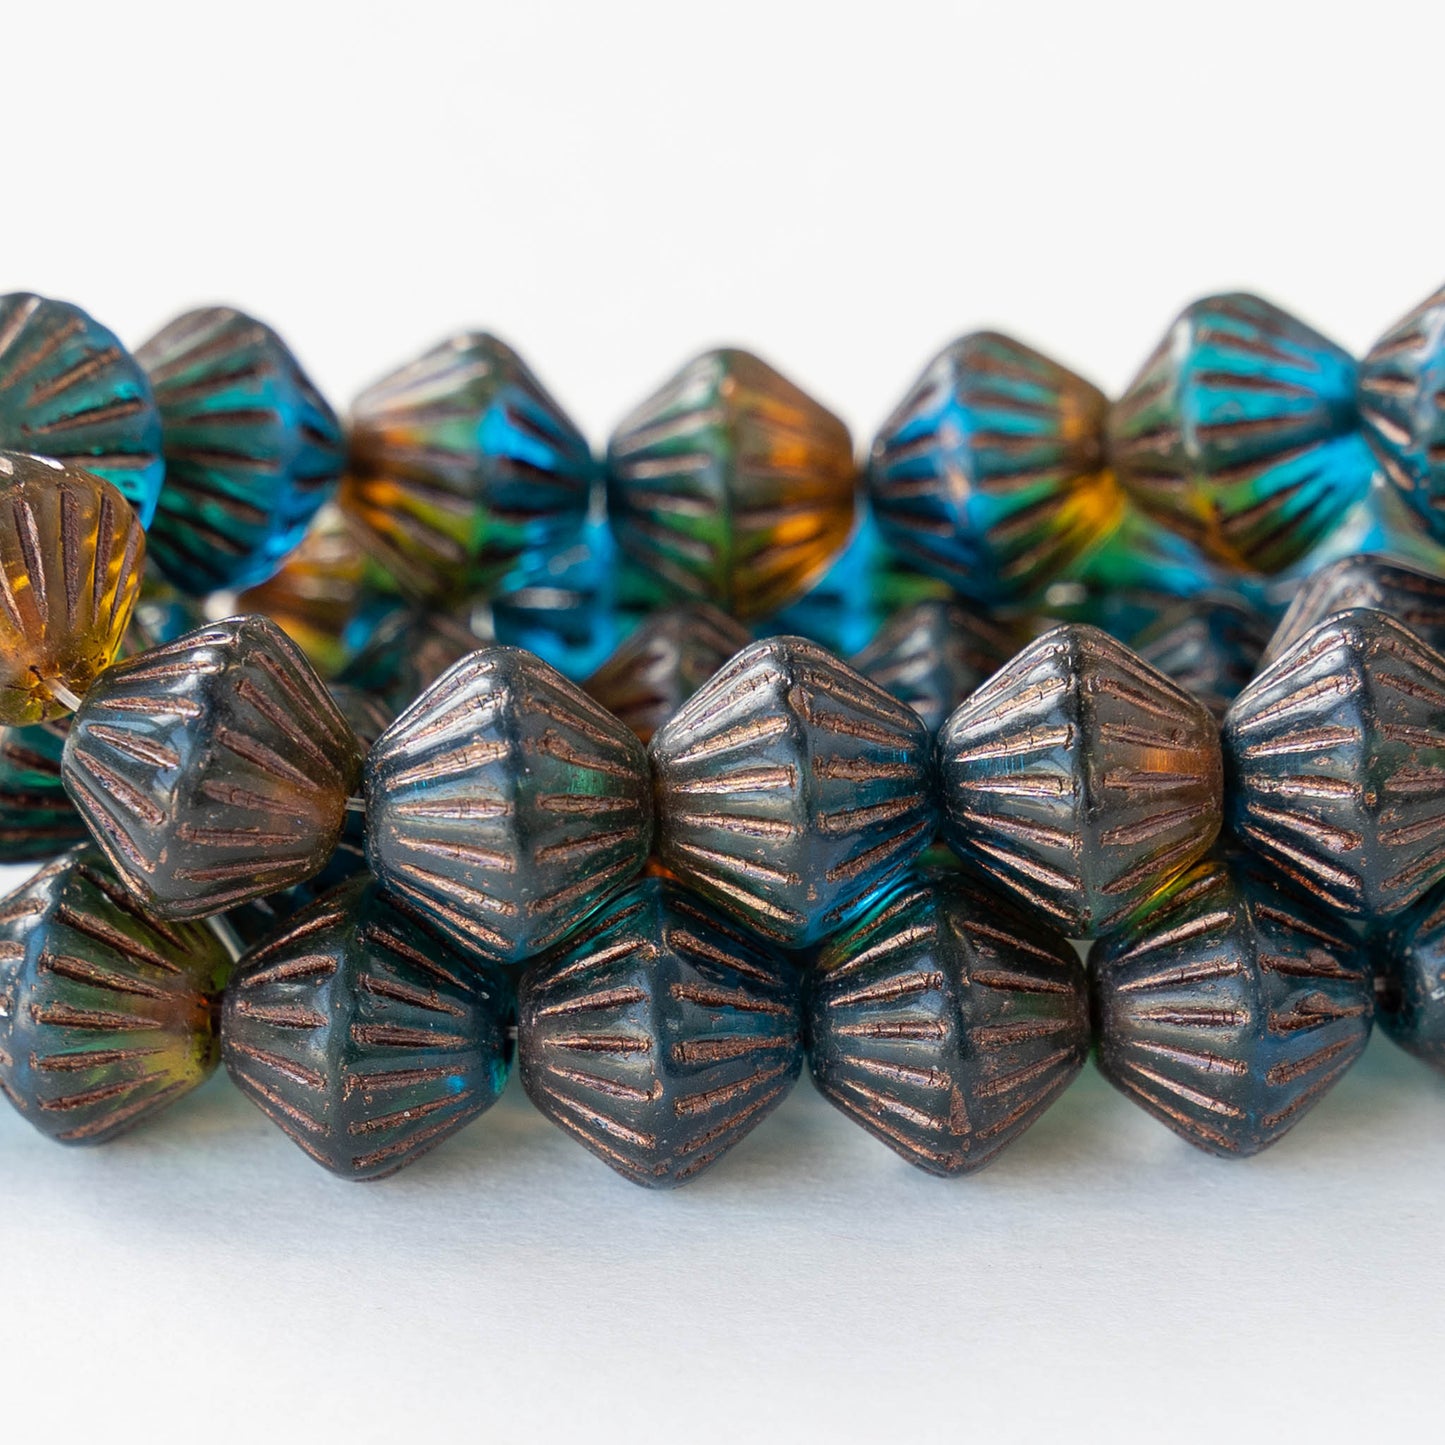 11mm Glass Bicone Beads - Teal and Amber with Copper Wash - 6 or 12 Beads